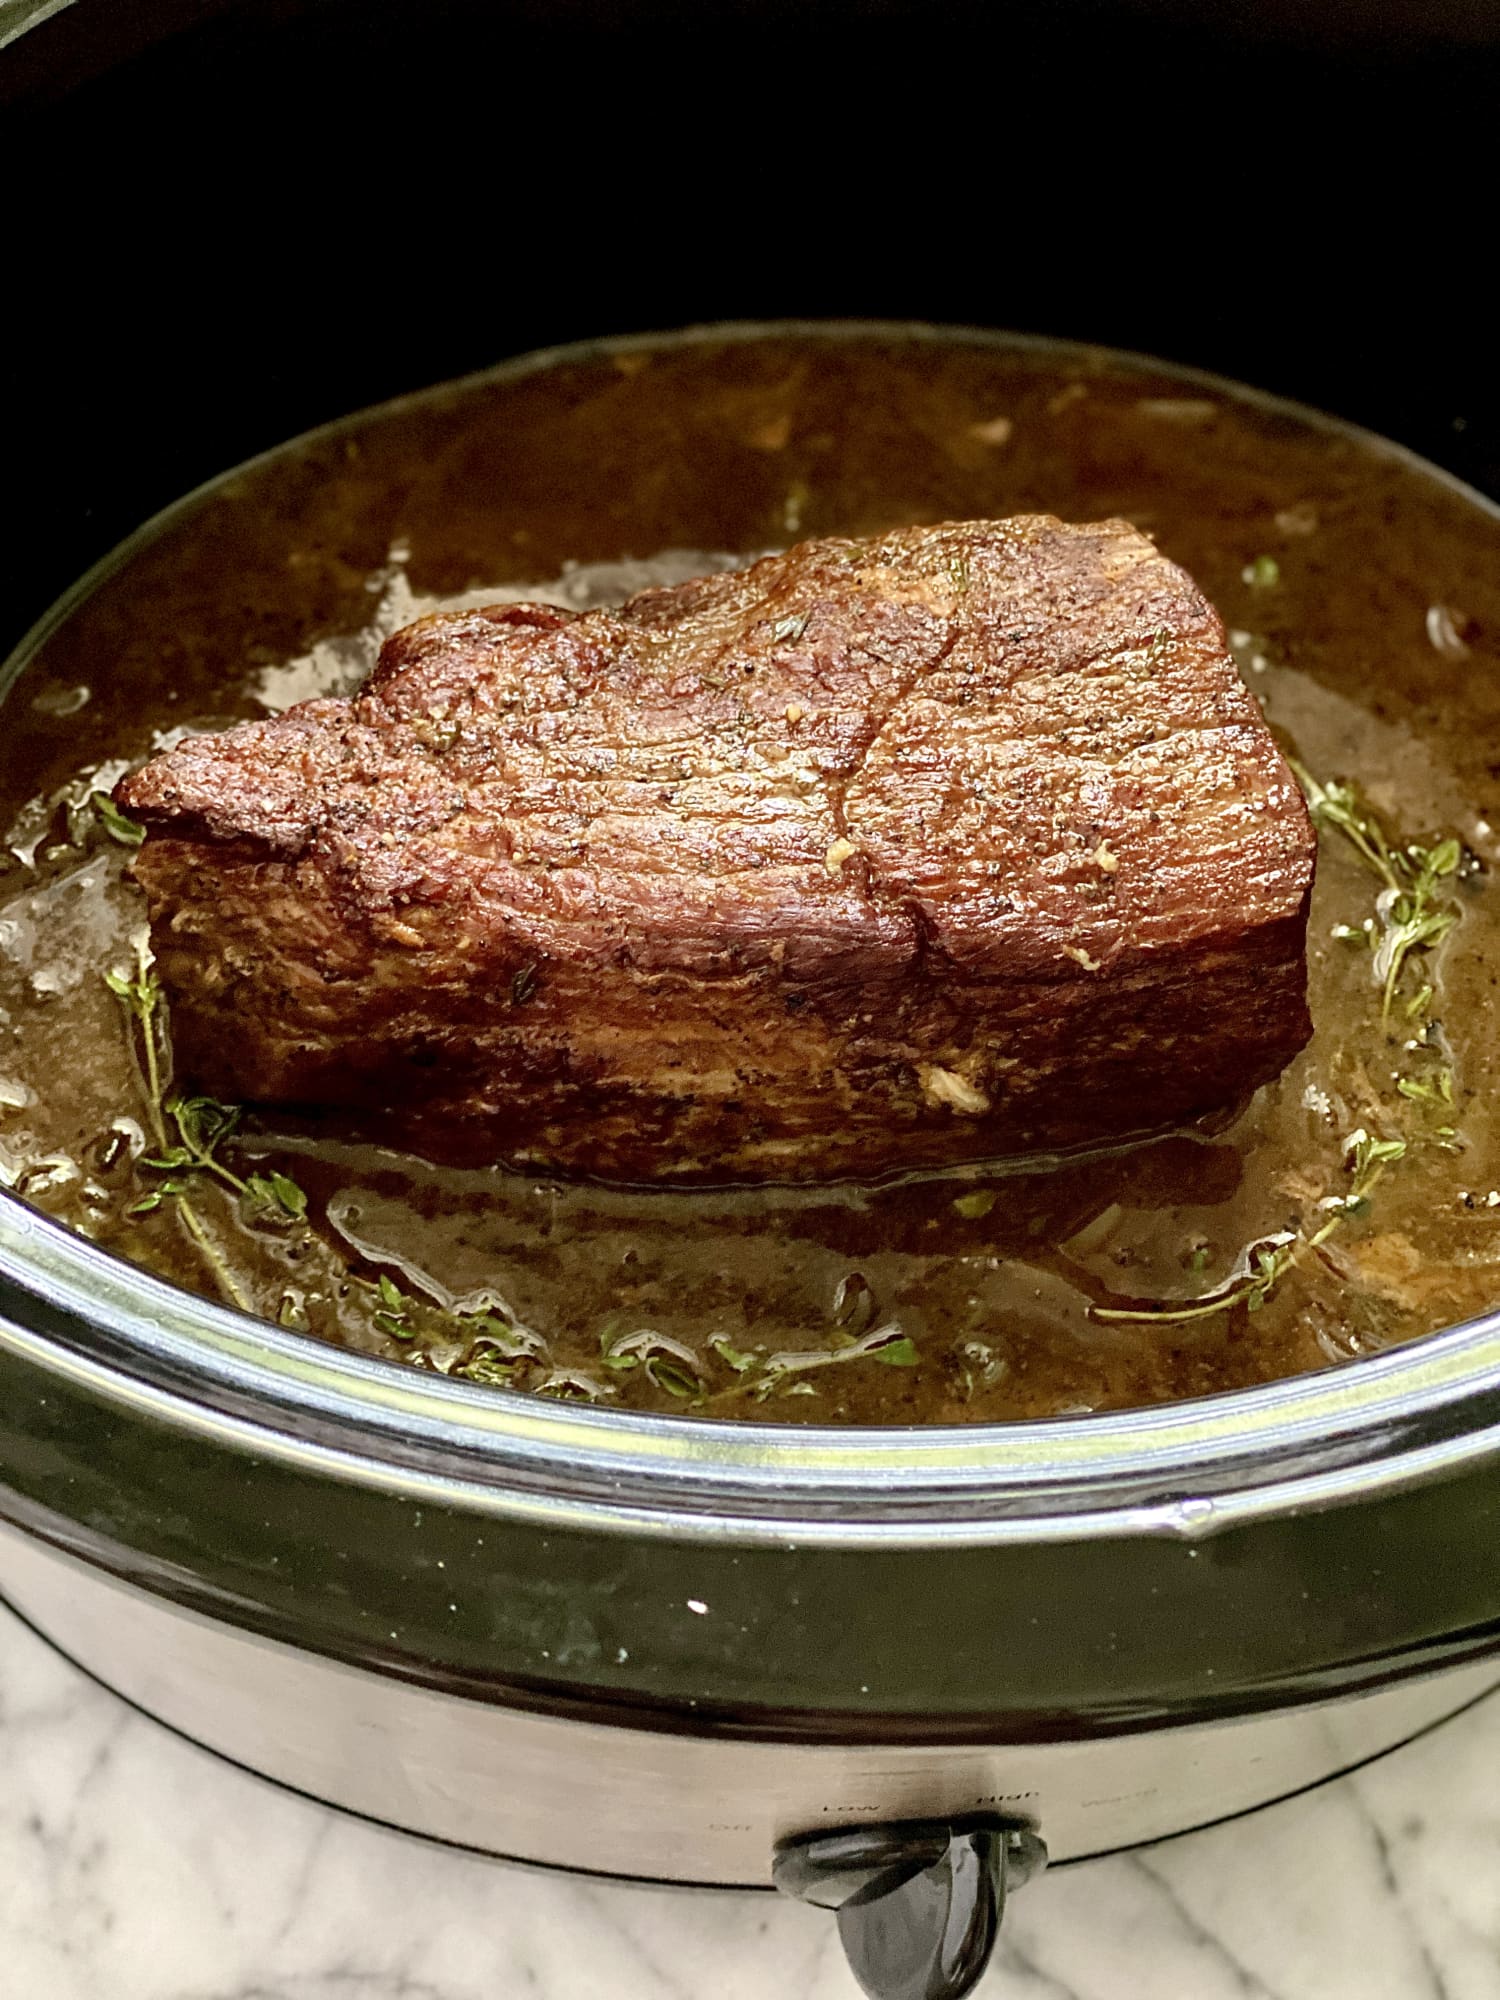 Slow Cooker Roast Beef Is an Easy and Impressive Holiday Main